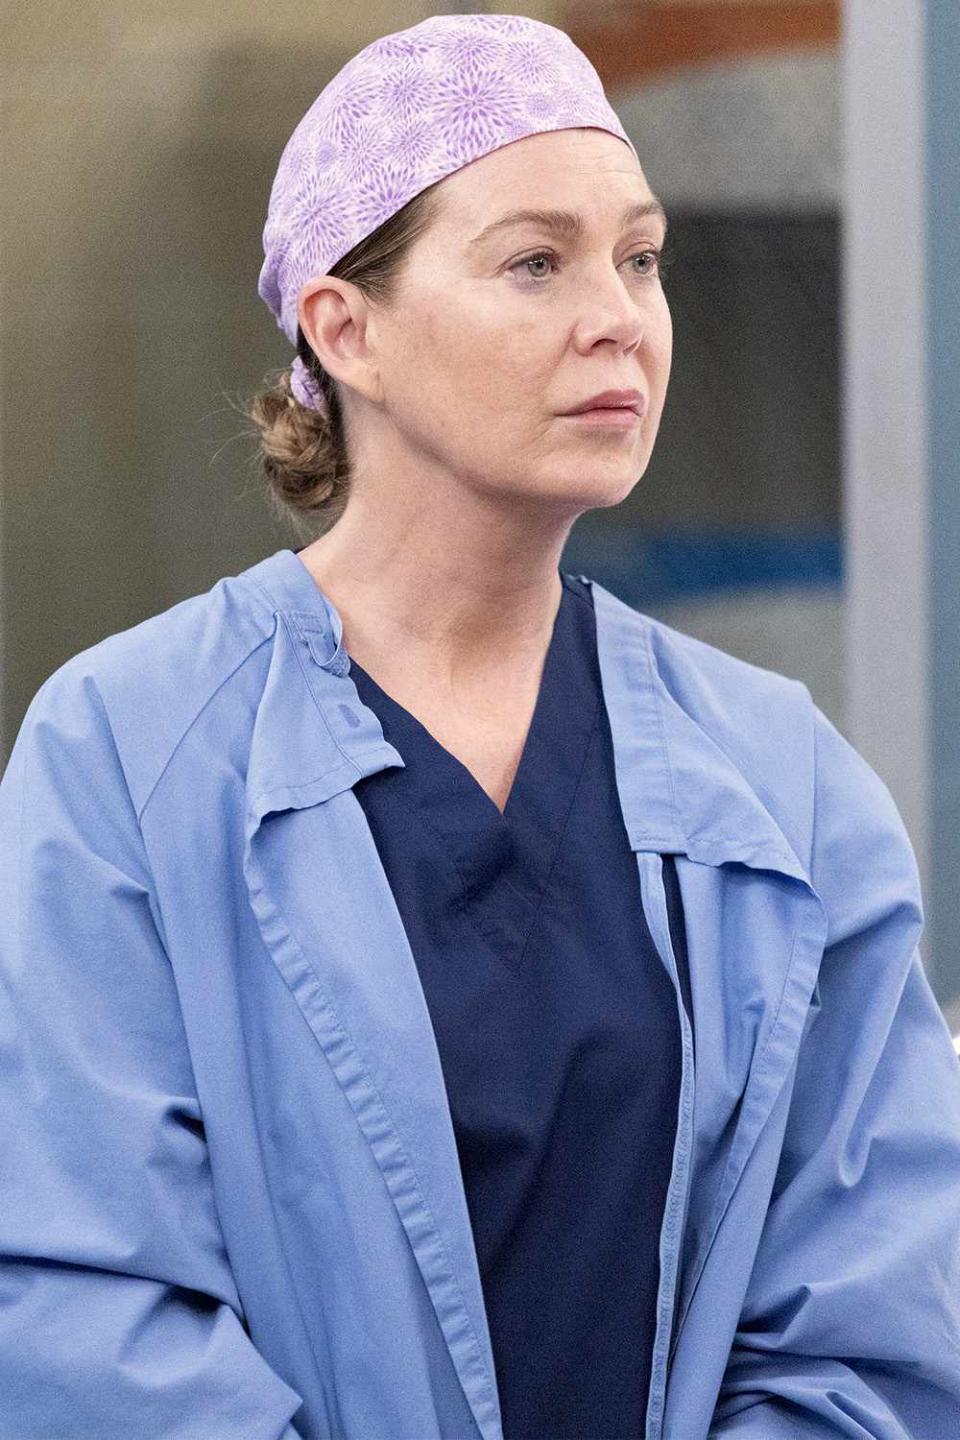 GREY’S ANATOMY - “Should I Stay or Should I Go” – Bailey faces an unhappy Catherine who is facing audits for several of her Foundation hospitals. Meanwhile, Addison is back at Grey Sloan; tensions rise between Meredith and Richard, and Owen returns to work on a new episode of “Grey’s Anatomy,” THURSDAY, MAY 5 (9:00-10:01 p.m. EDT), on ABC. (ABC/Liliane Lathan) ELLEN POMPEO